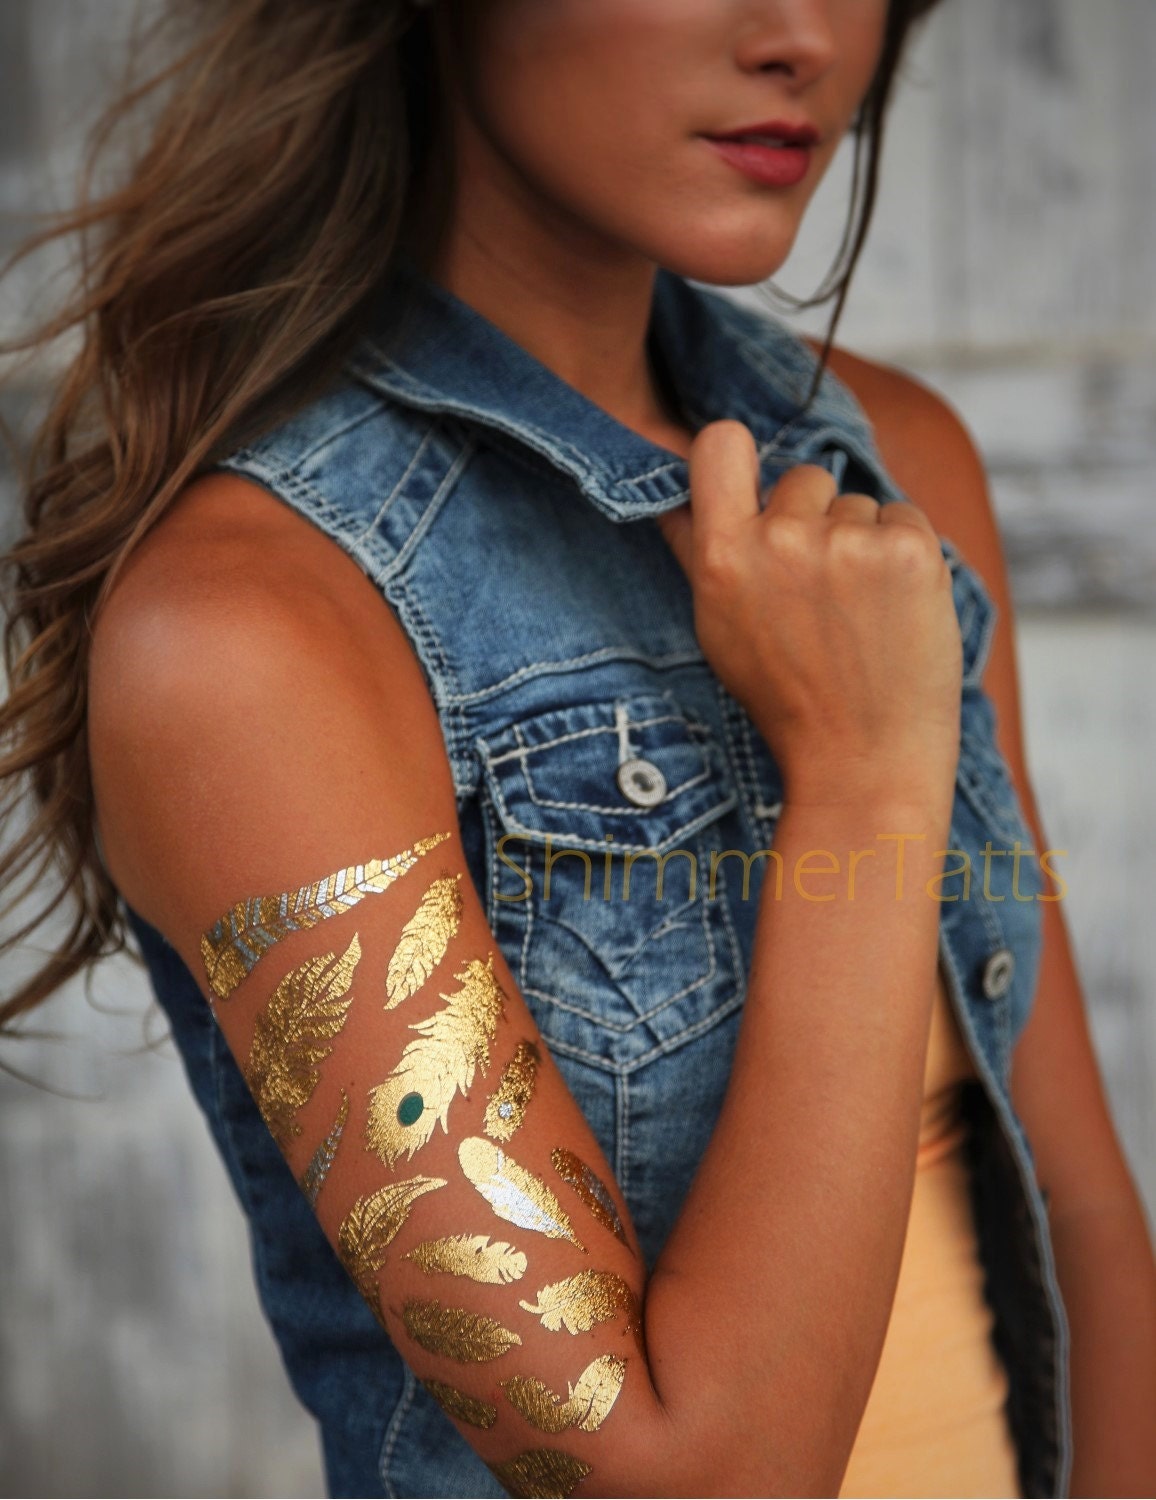 Gold Braid Metallic Temporary Tattoo Lace Winged Egyptian Feather Flower  Bowknot | eBay